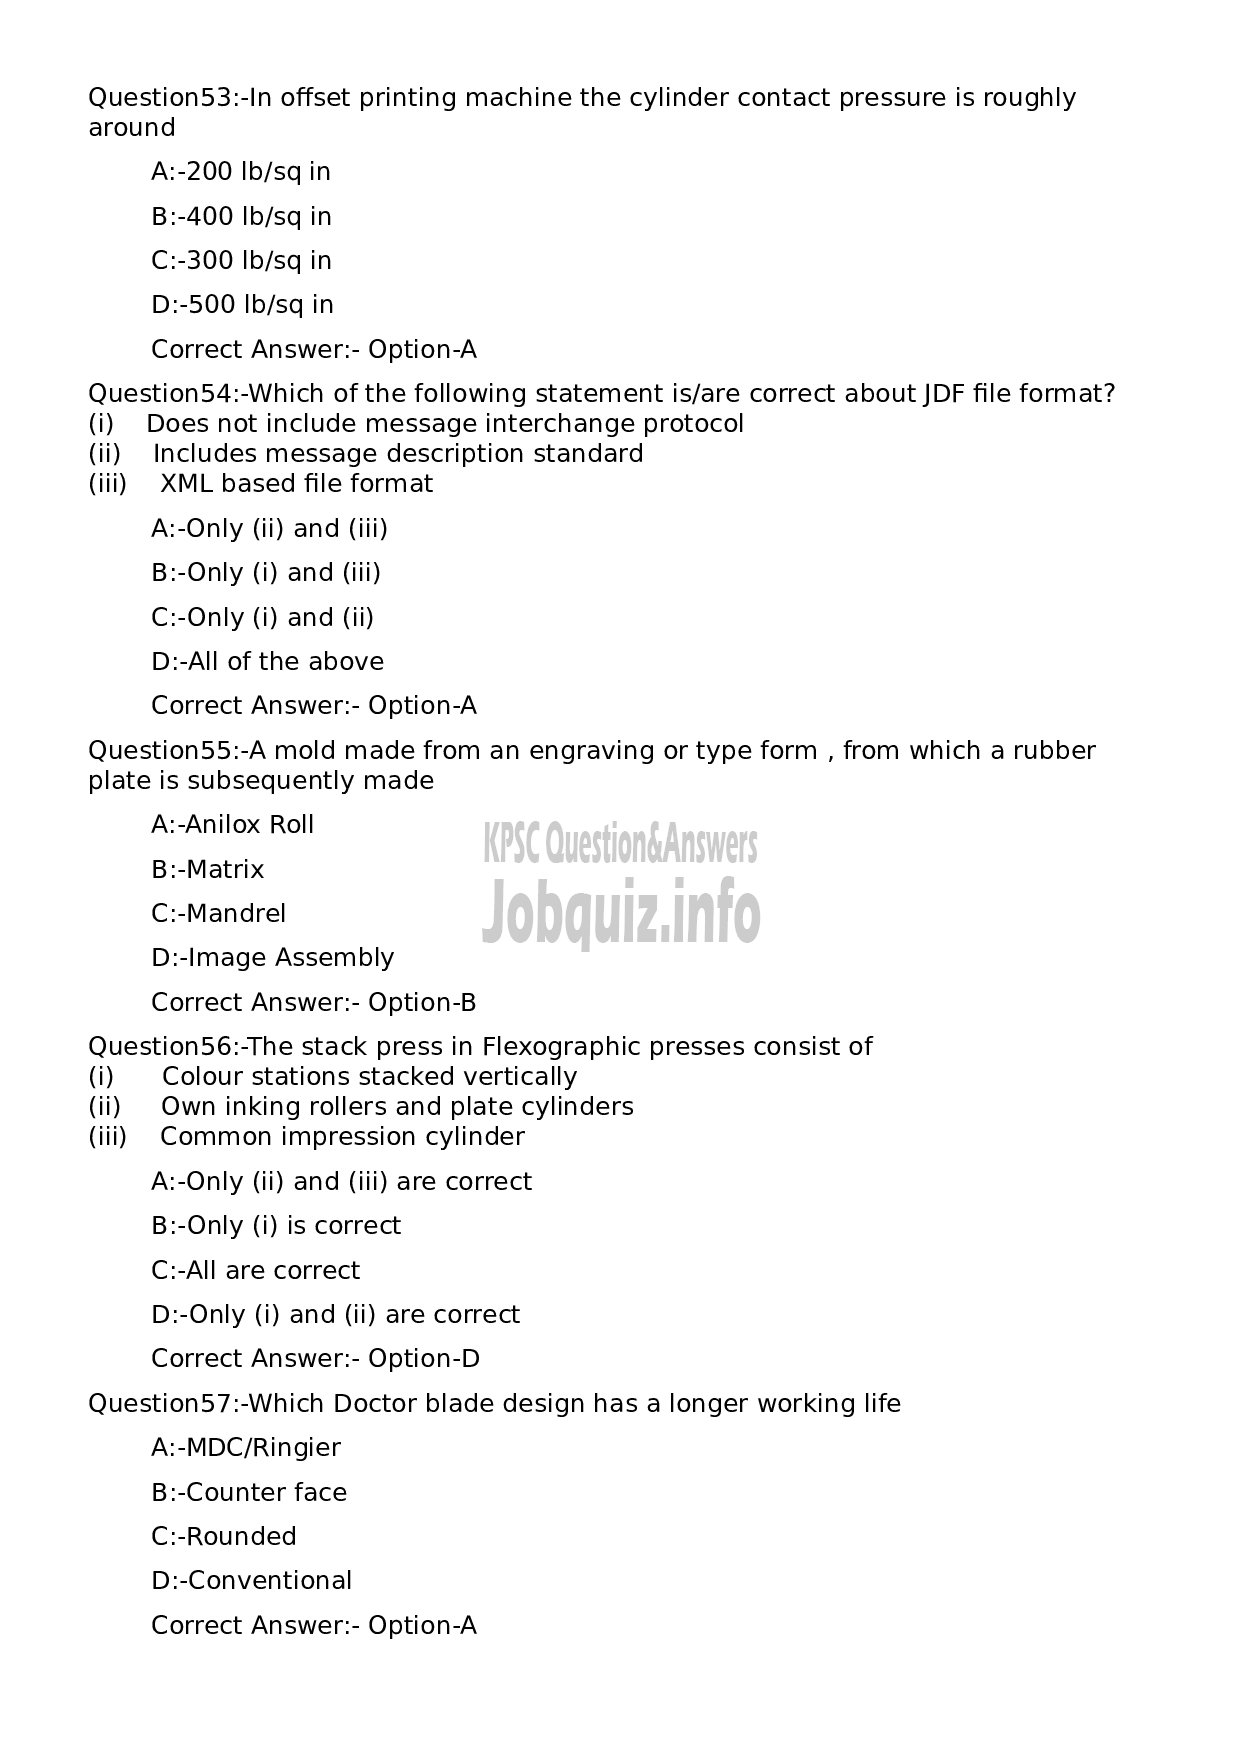 Kerala PSC Question Paper - Lecturer in Printing Technology-11